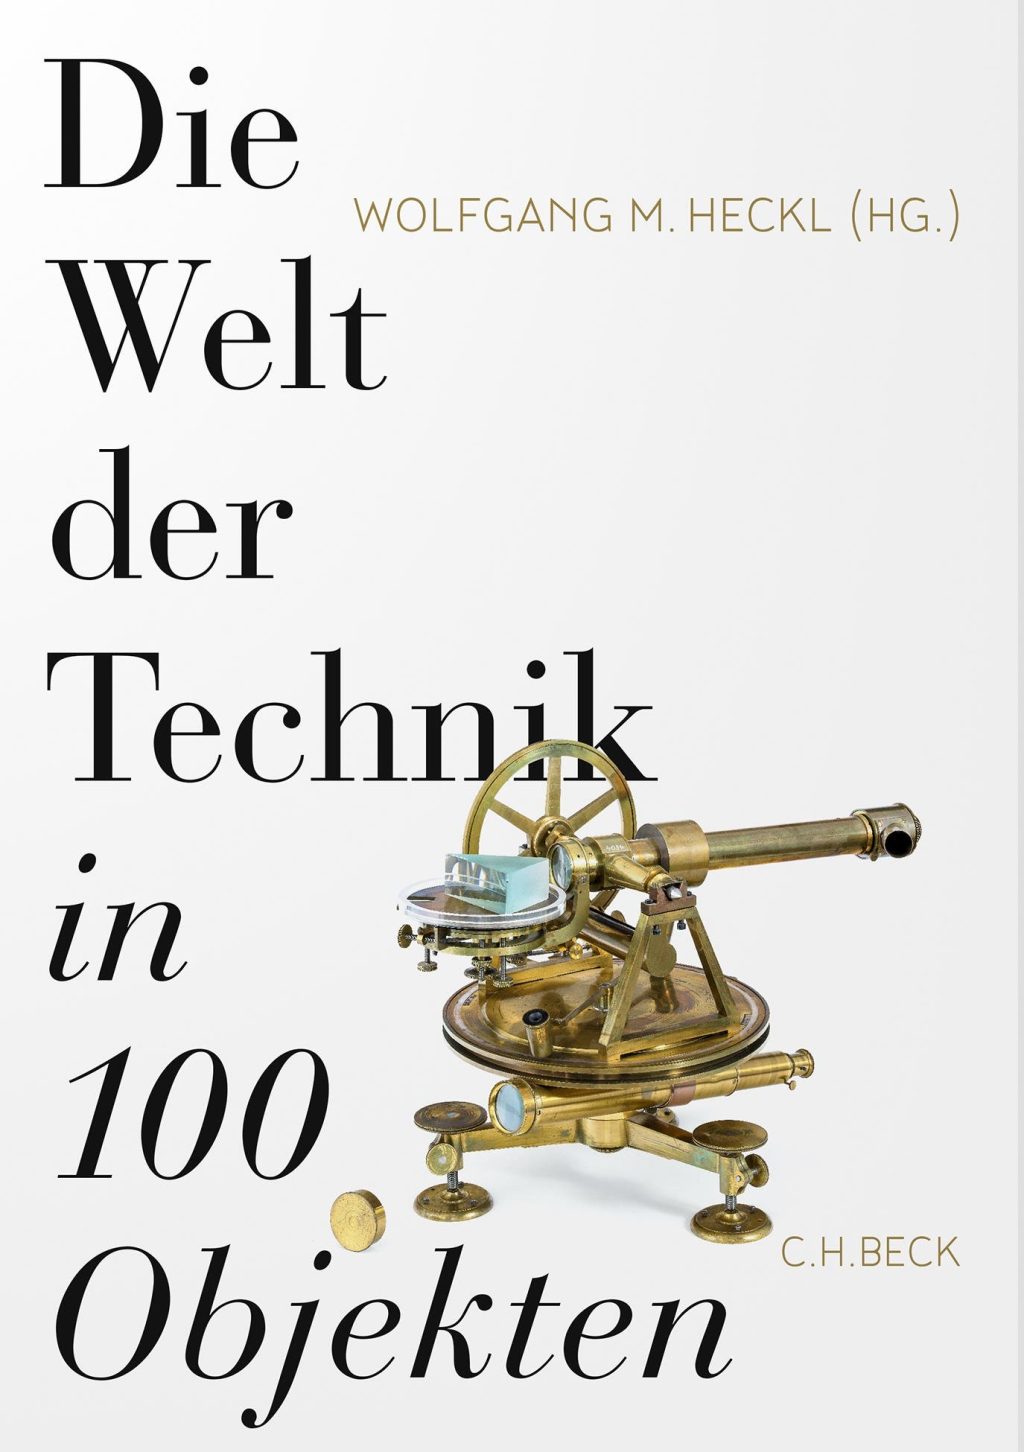 Book review on "The World of Technology in 100 Objects"